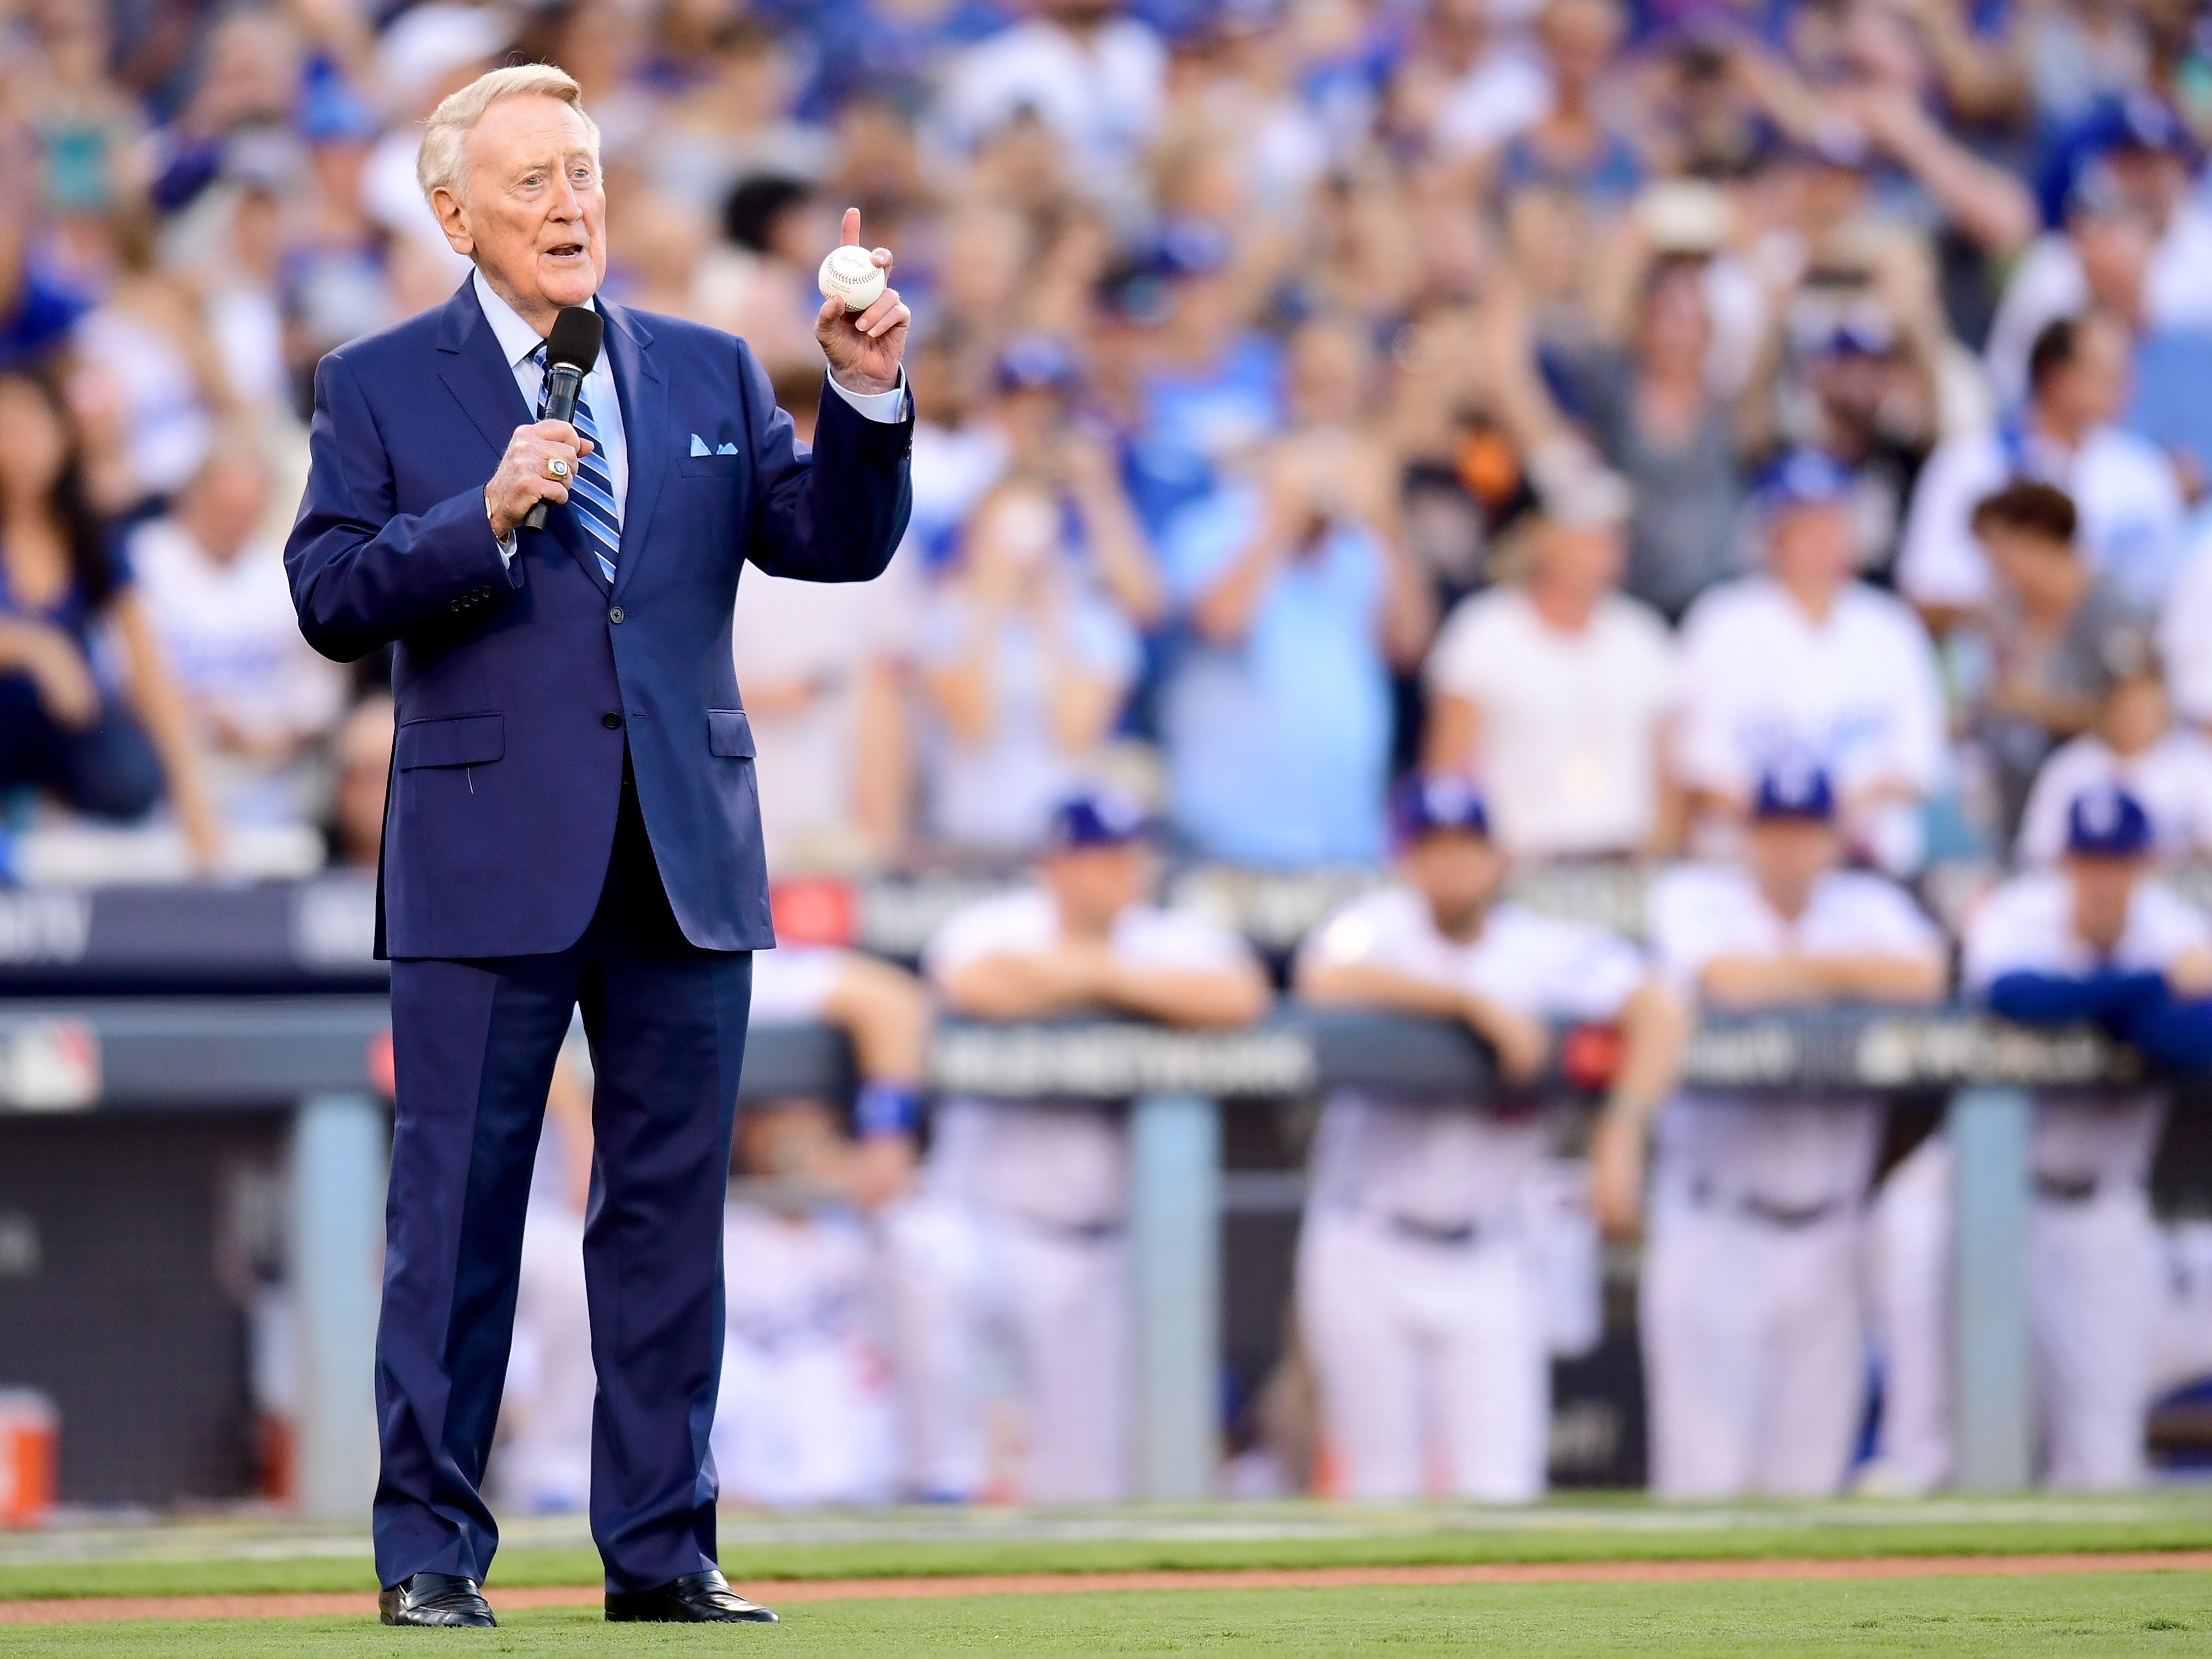 Vin Scully, the famed Los Angeles Dodgers broadcaster, dies at 94